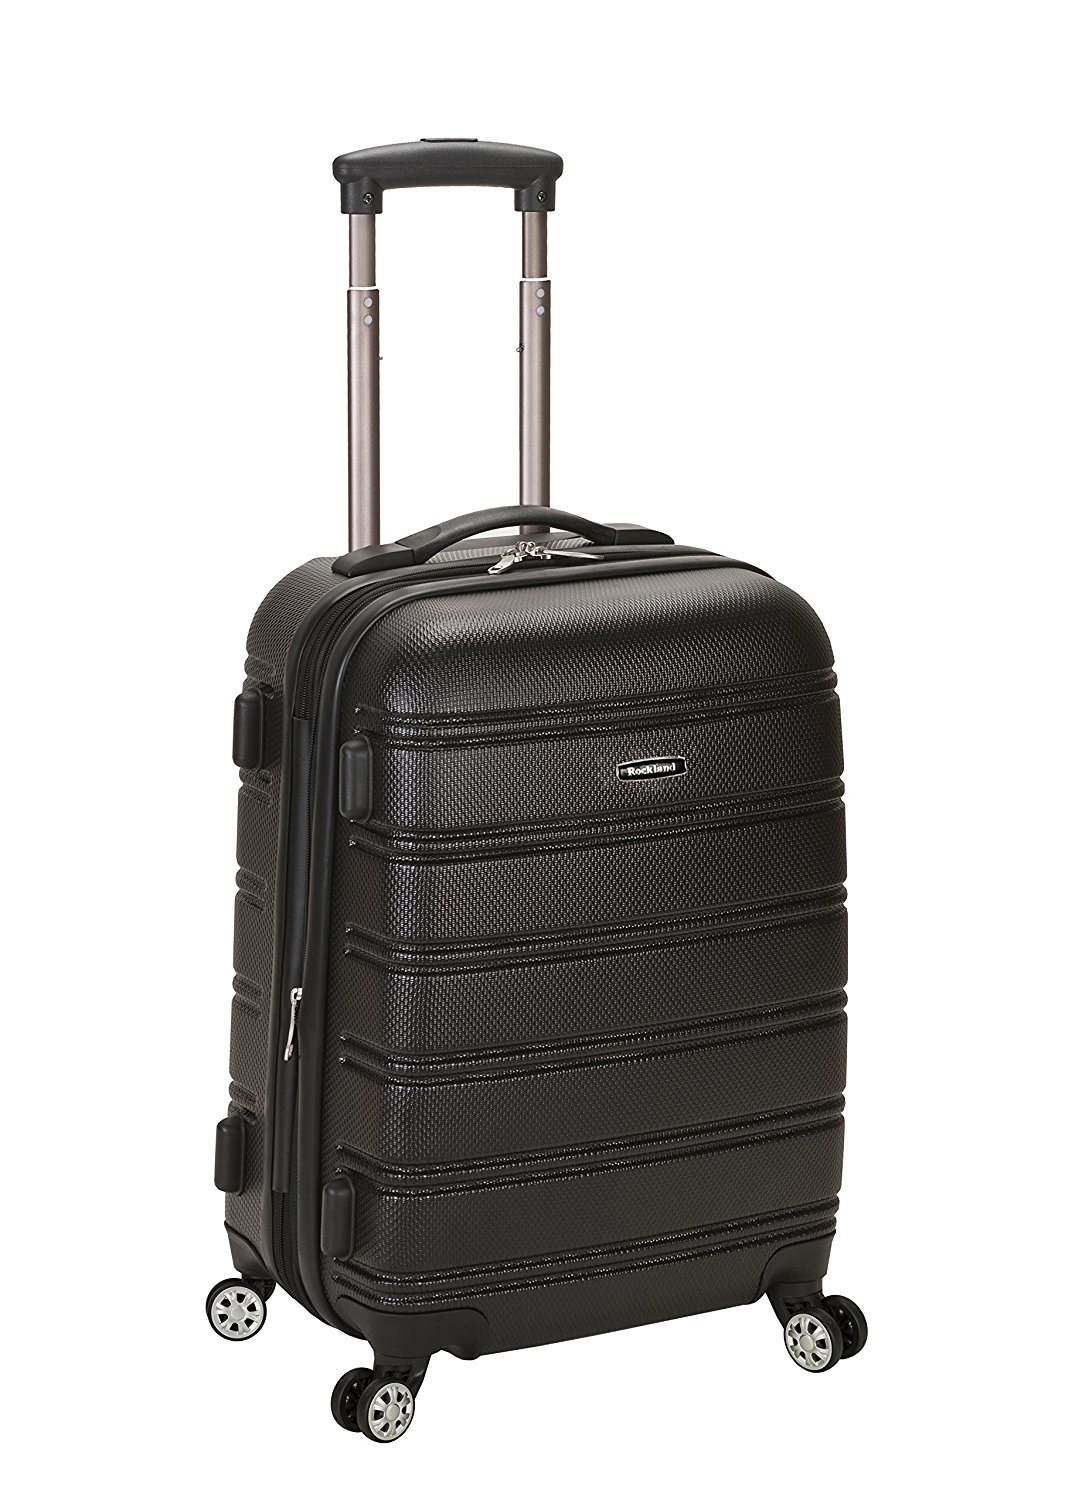 Rockland Luggage Melbourne 20 Inch Expandable Abs Carry-On Luggage